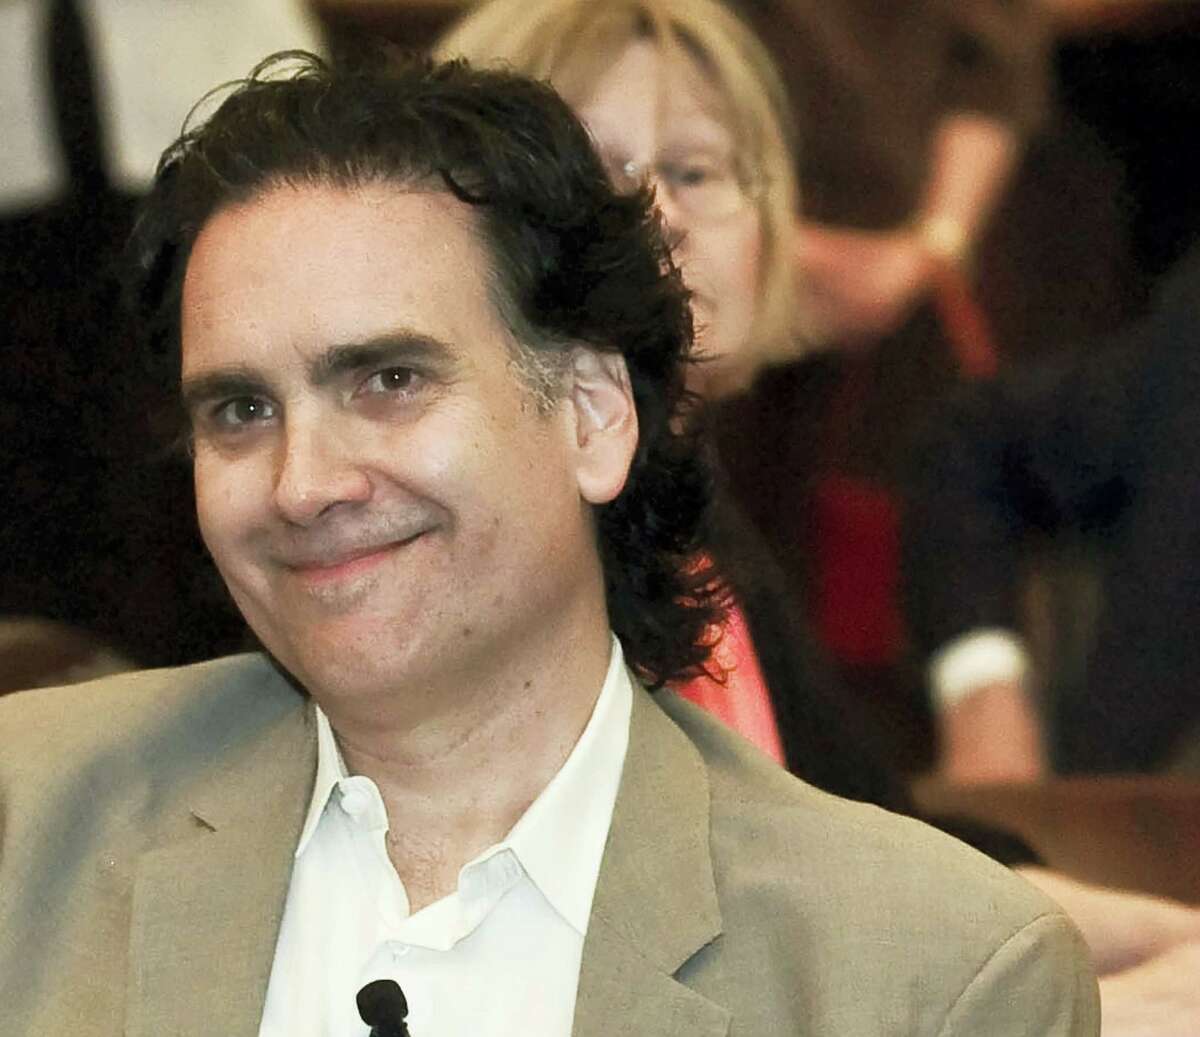 In this June 2, 2004 photo, musician Peter Buffett is seen in Omaha, Neb. Impressed by a current wave of “black girl magic,” a foundation run by Buffett, the youngest son of millionaire investor Warren Buffett, plans to spend more than $90 million on improving the lives of young women of color, The Associated Press has learned.